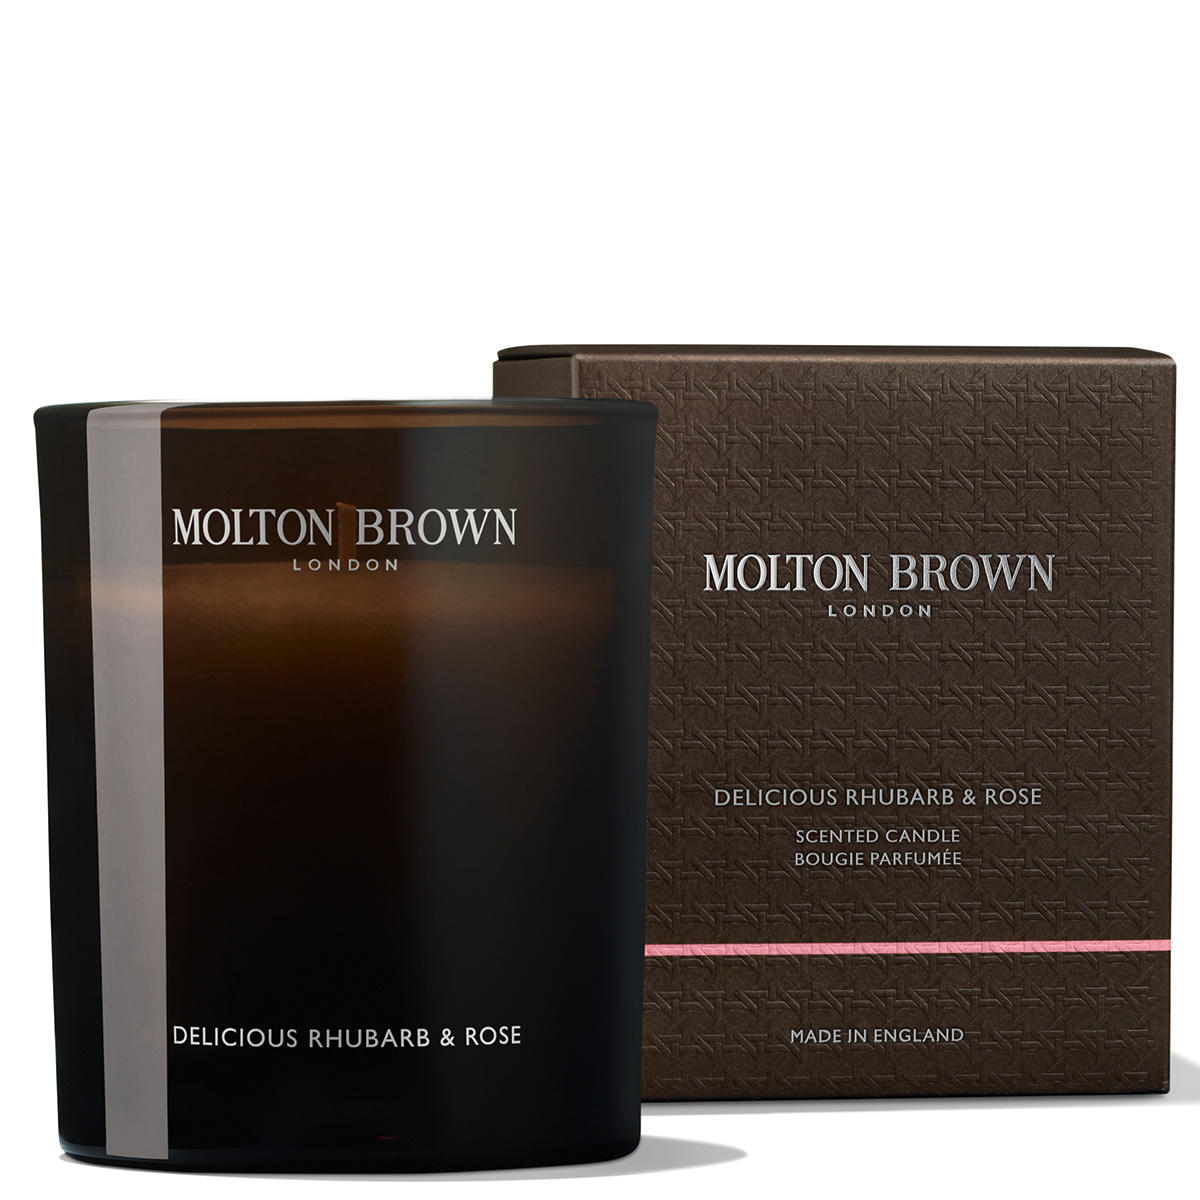 MOLTON BROWN Delicious Rhubarb & Rose Scented Candle 190 g - 1